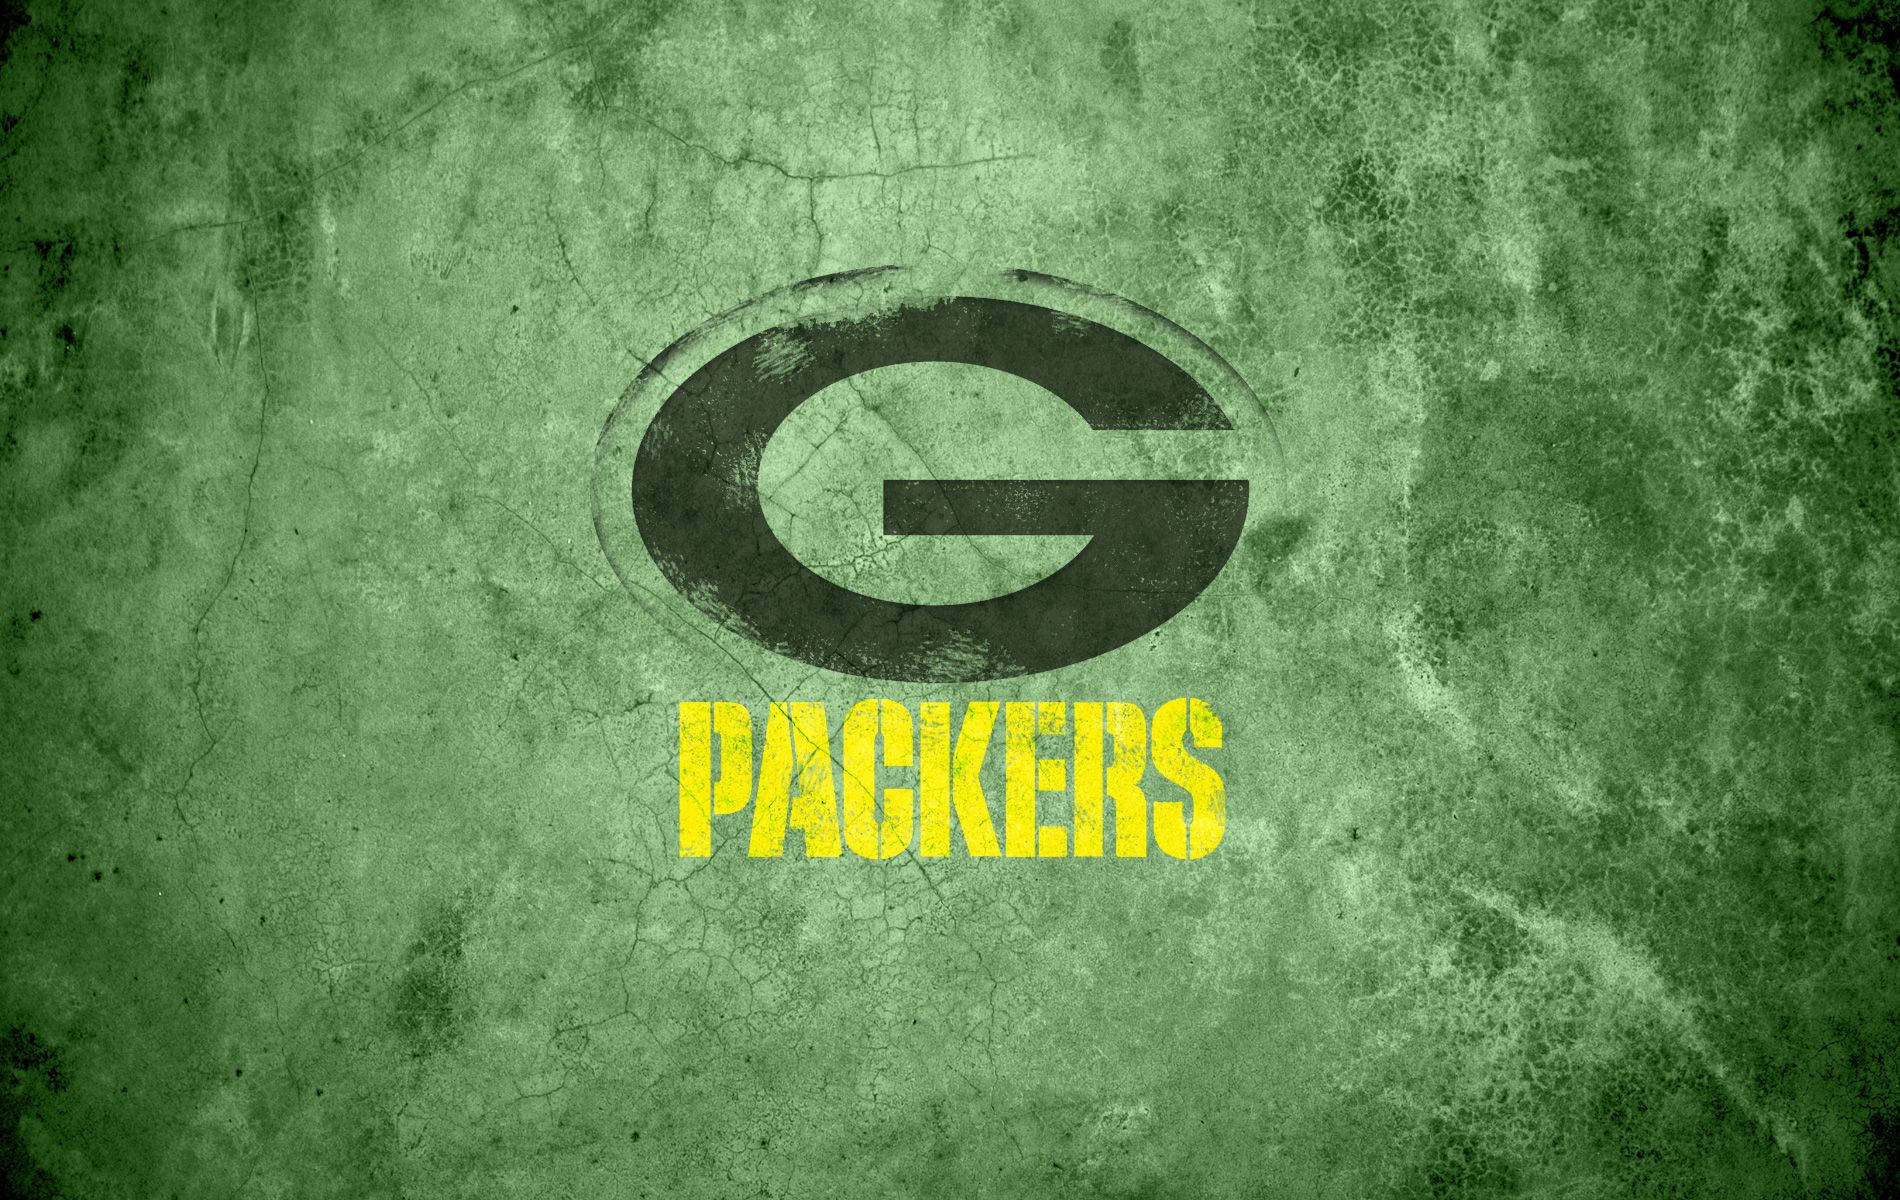 Champions Green Bay Packers Logo Background